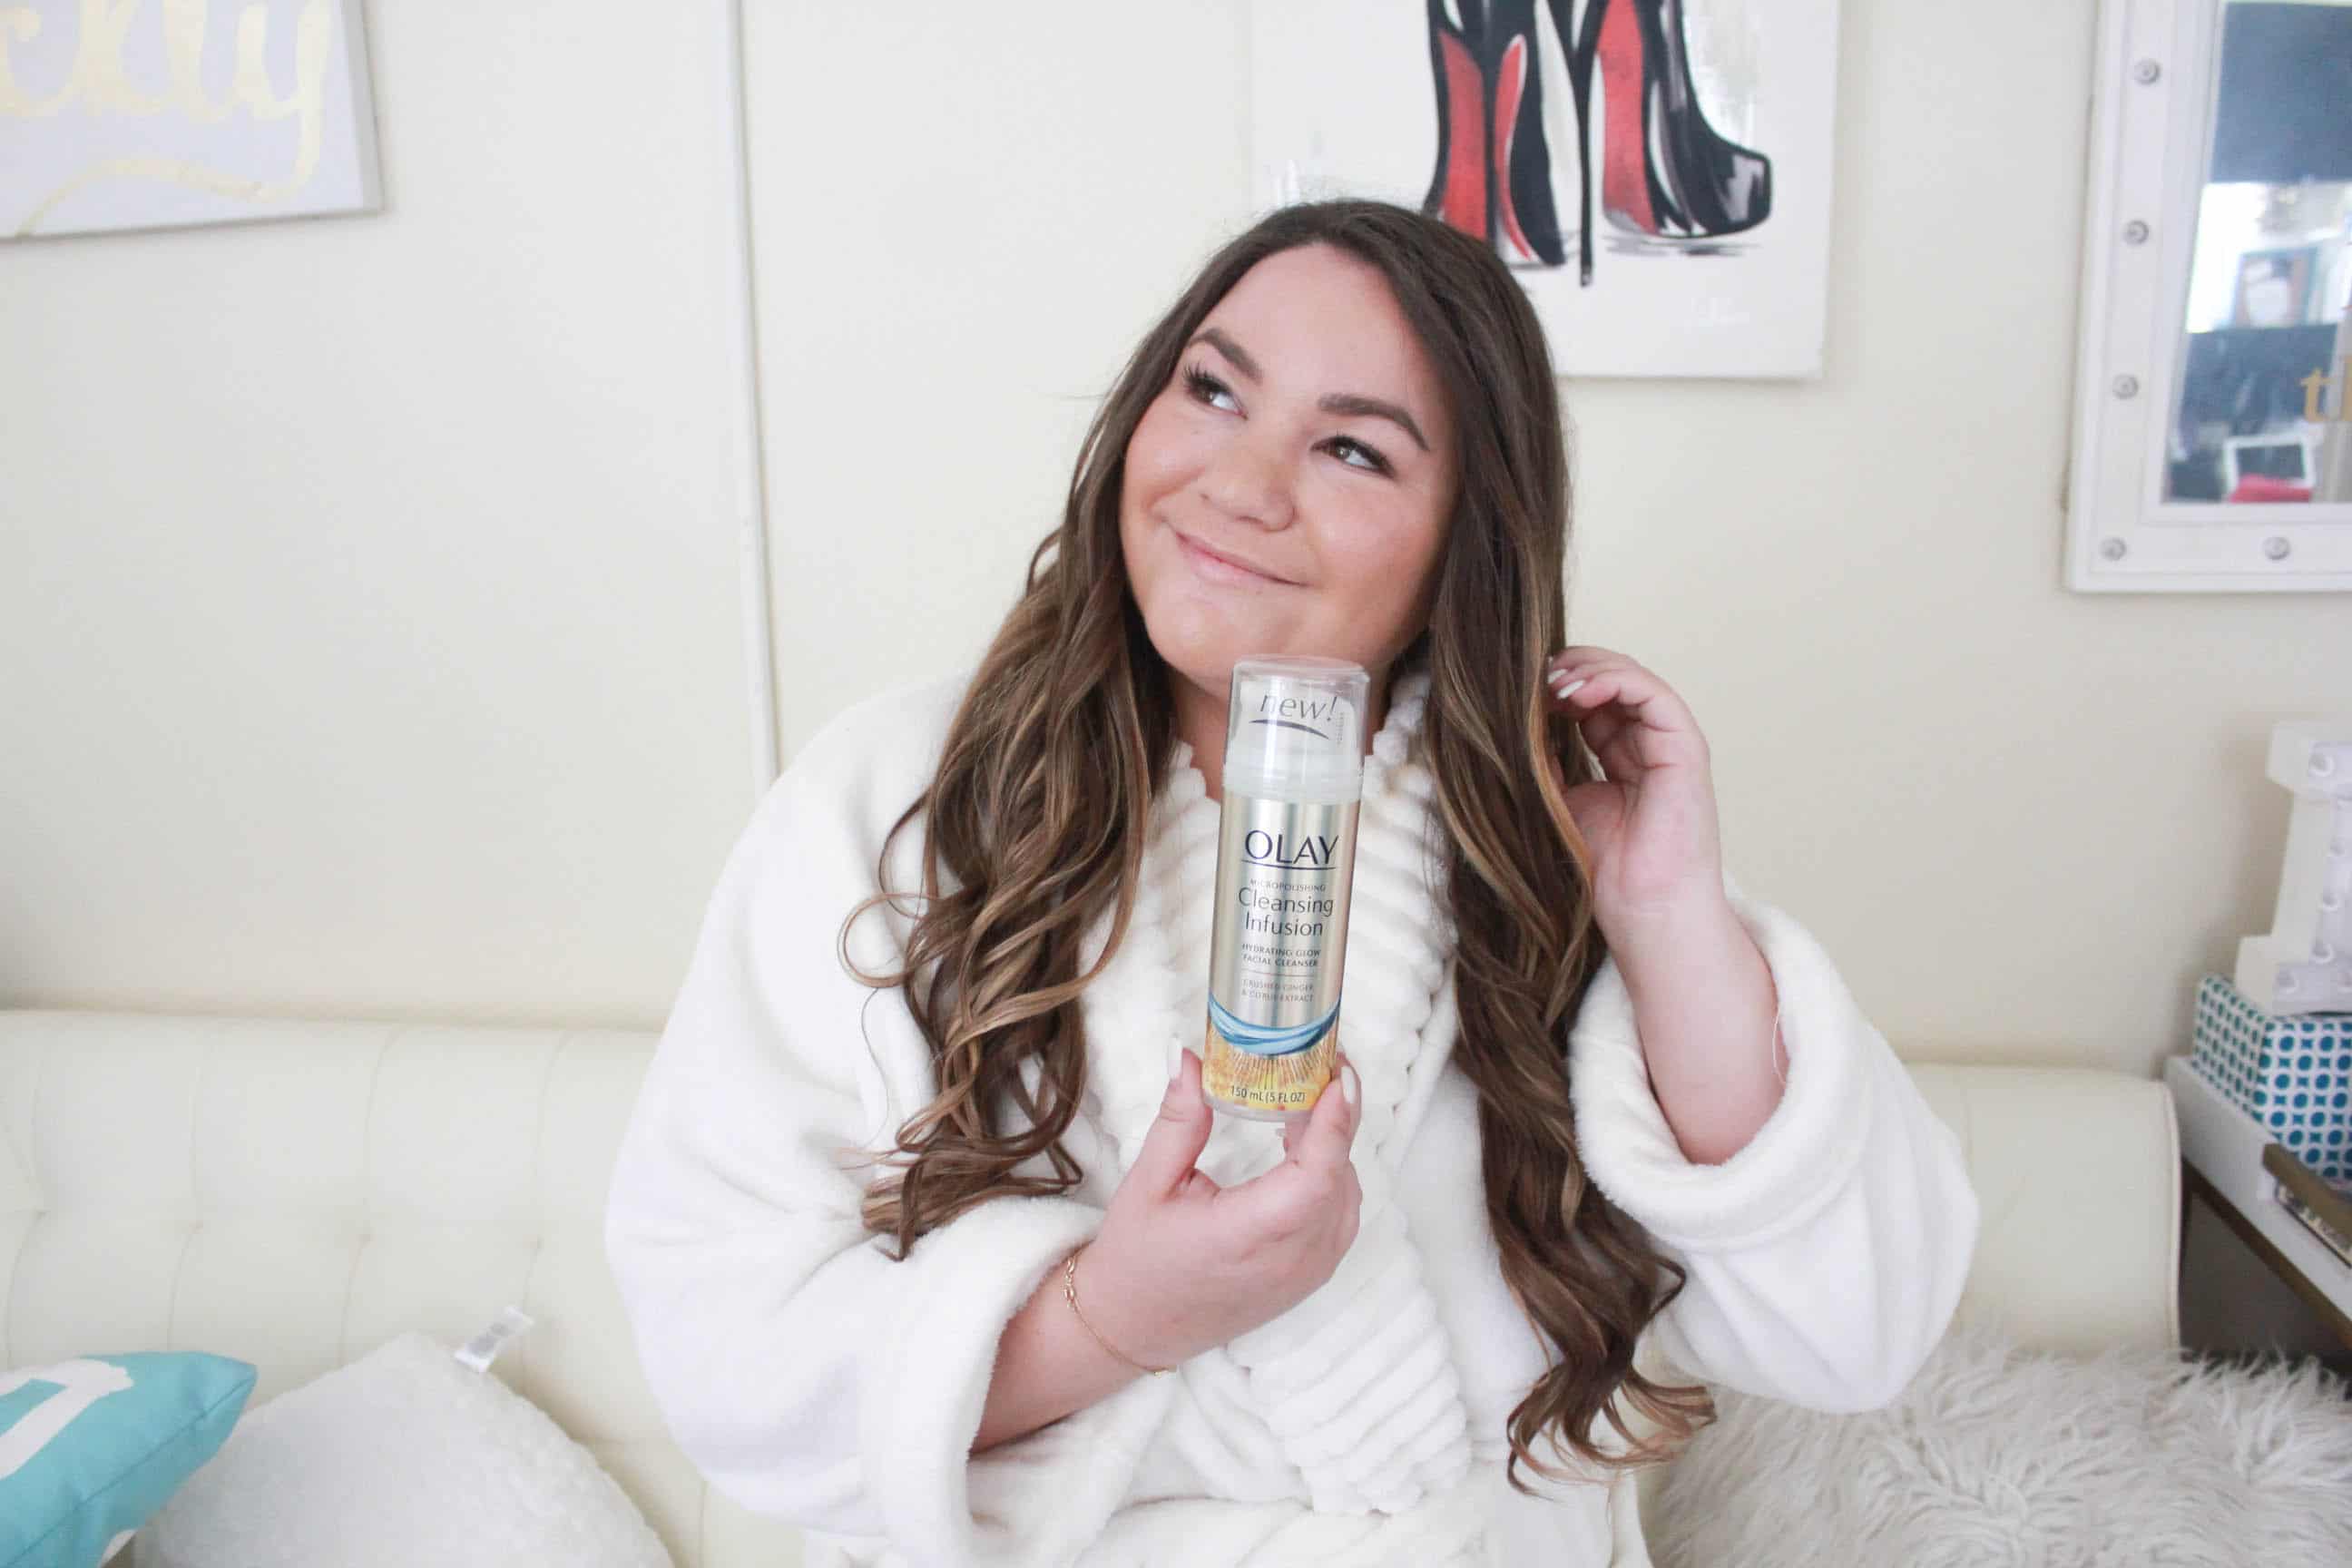 missyonmadison, missyonmadison blog, missyonmadison instagram, olay, olay skincare, olay infusions, olay cleansing infusions, bloglovin, la blogger, beauty blogger, beauty blog, beauty tips, skincare routine, skincare tutorial, olay glow up, glow up,